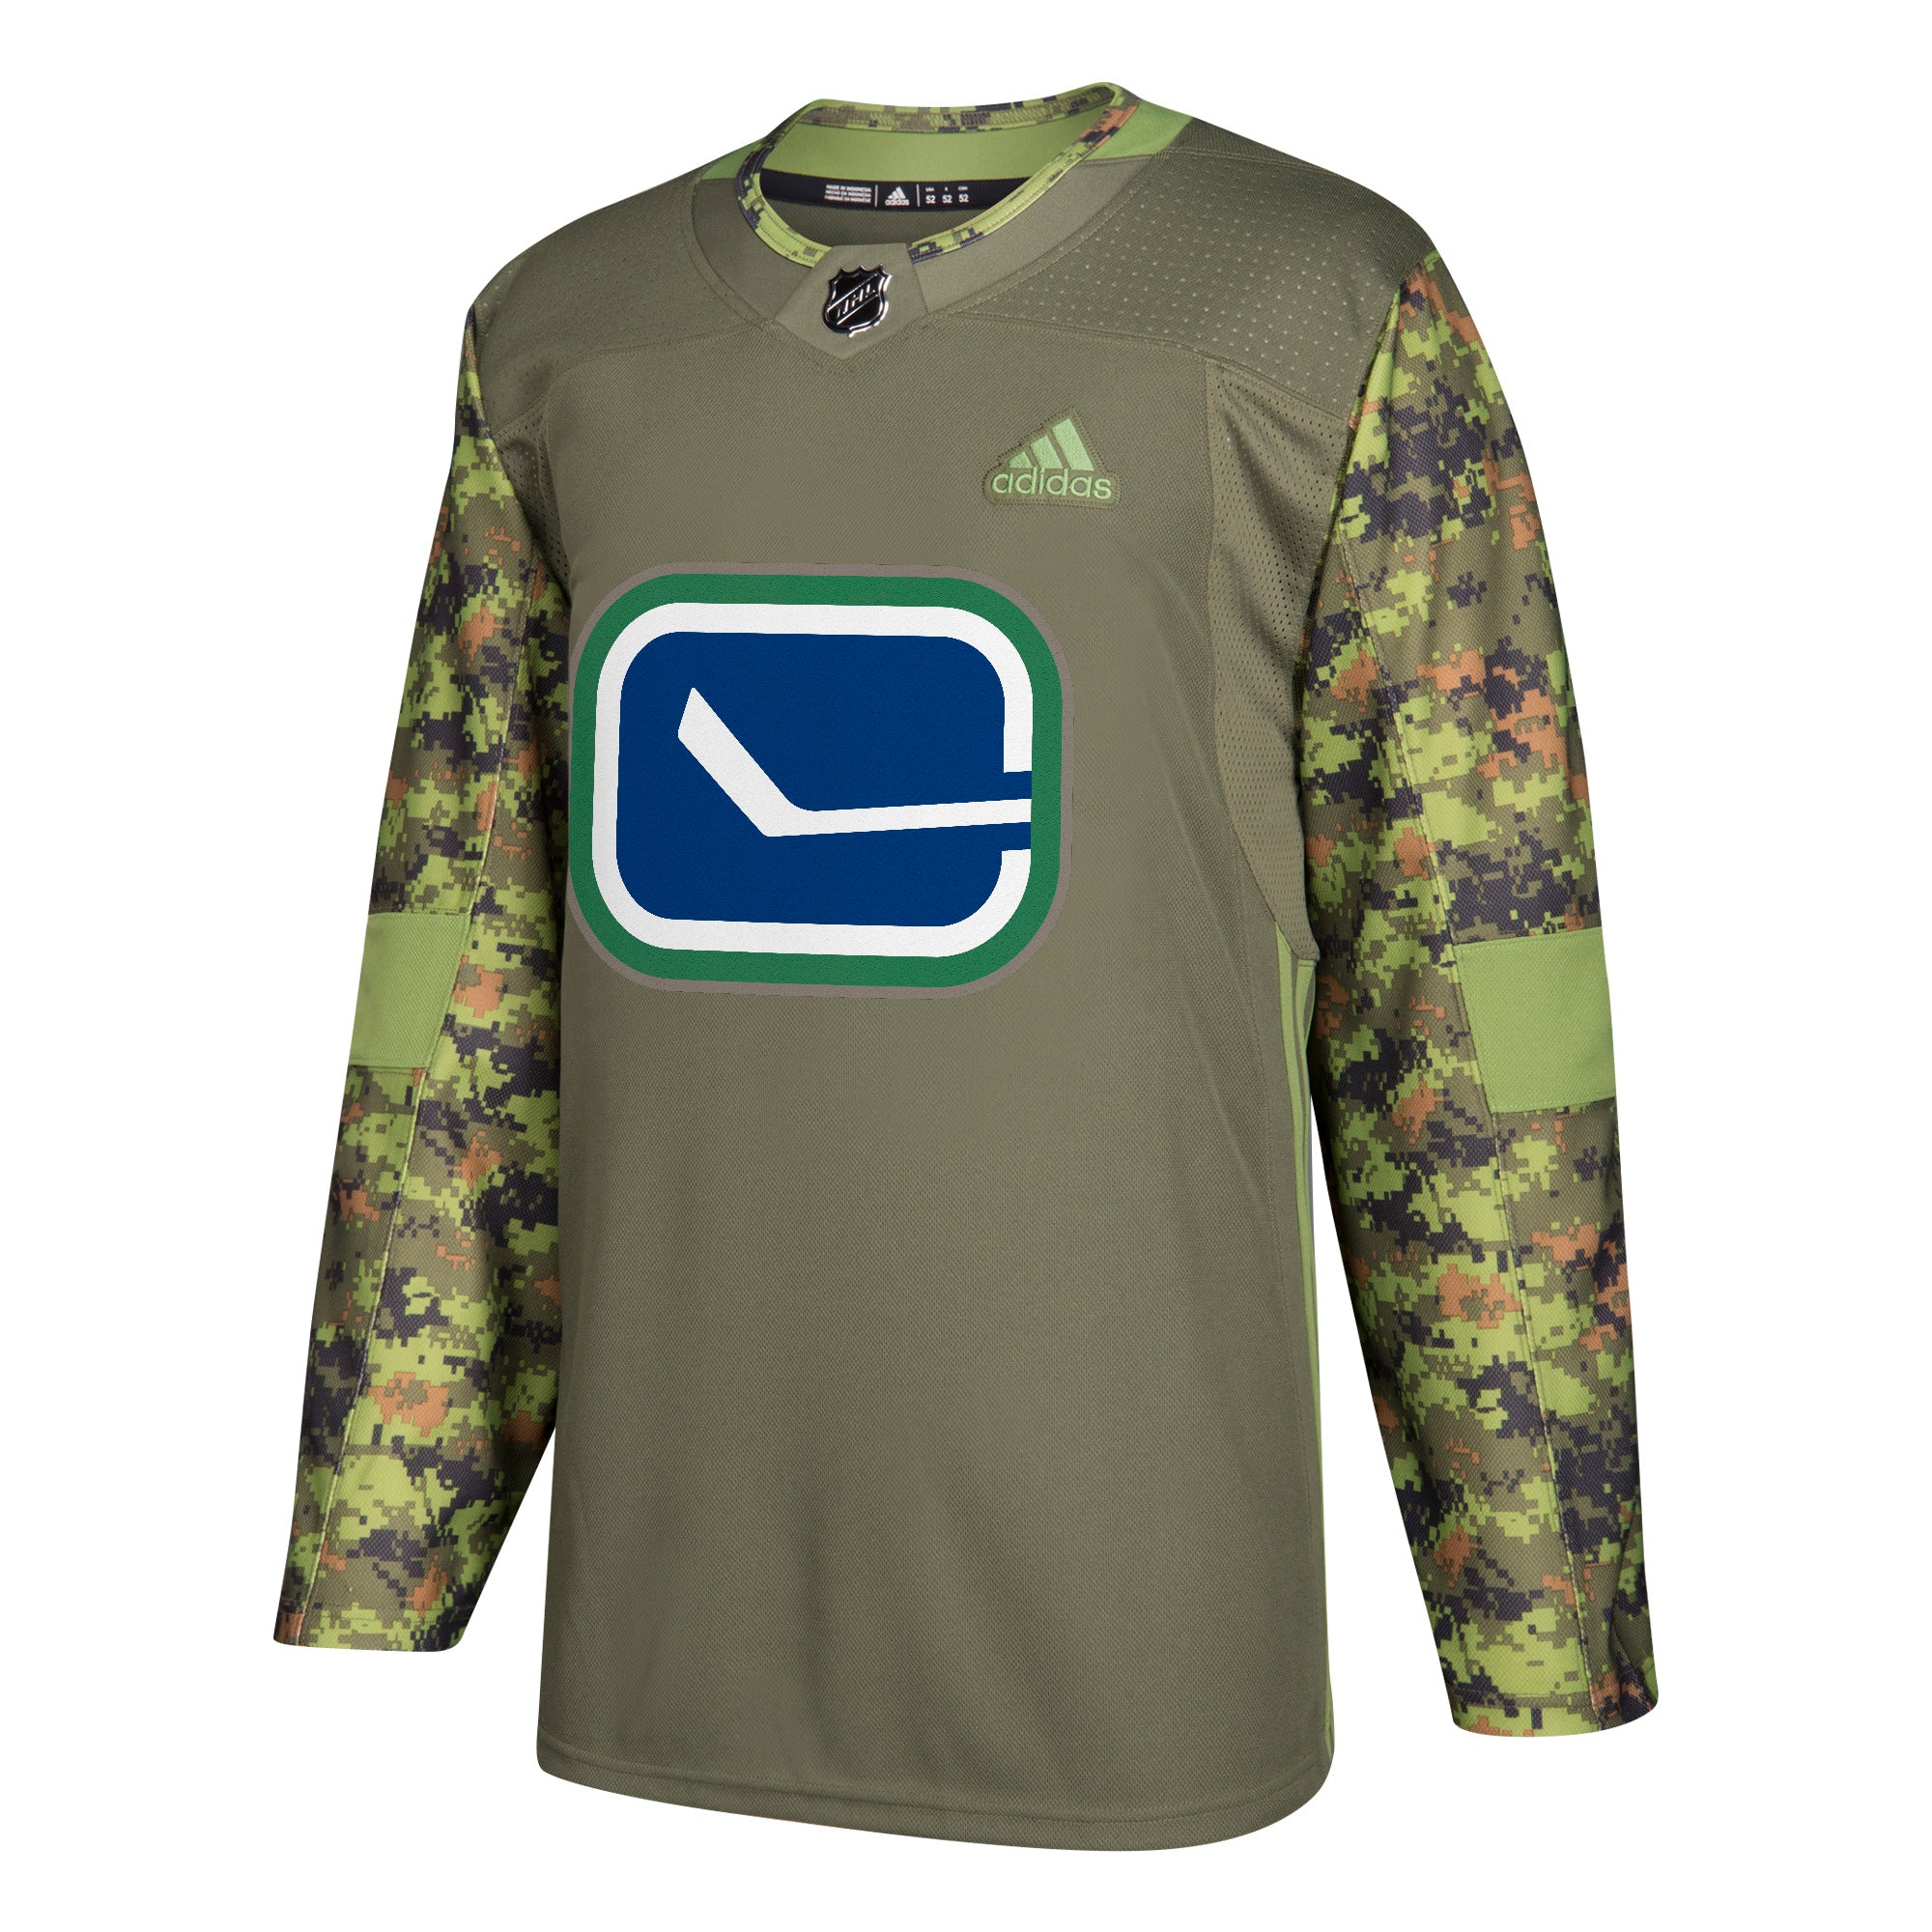 ADIDAS VANCOUVER CANUCKS ,AUTHENTIC ROYAL BLUE JERSEY 60